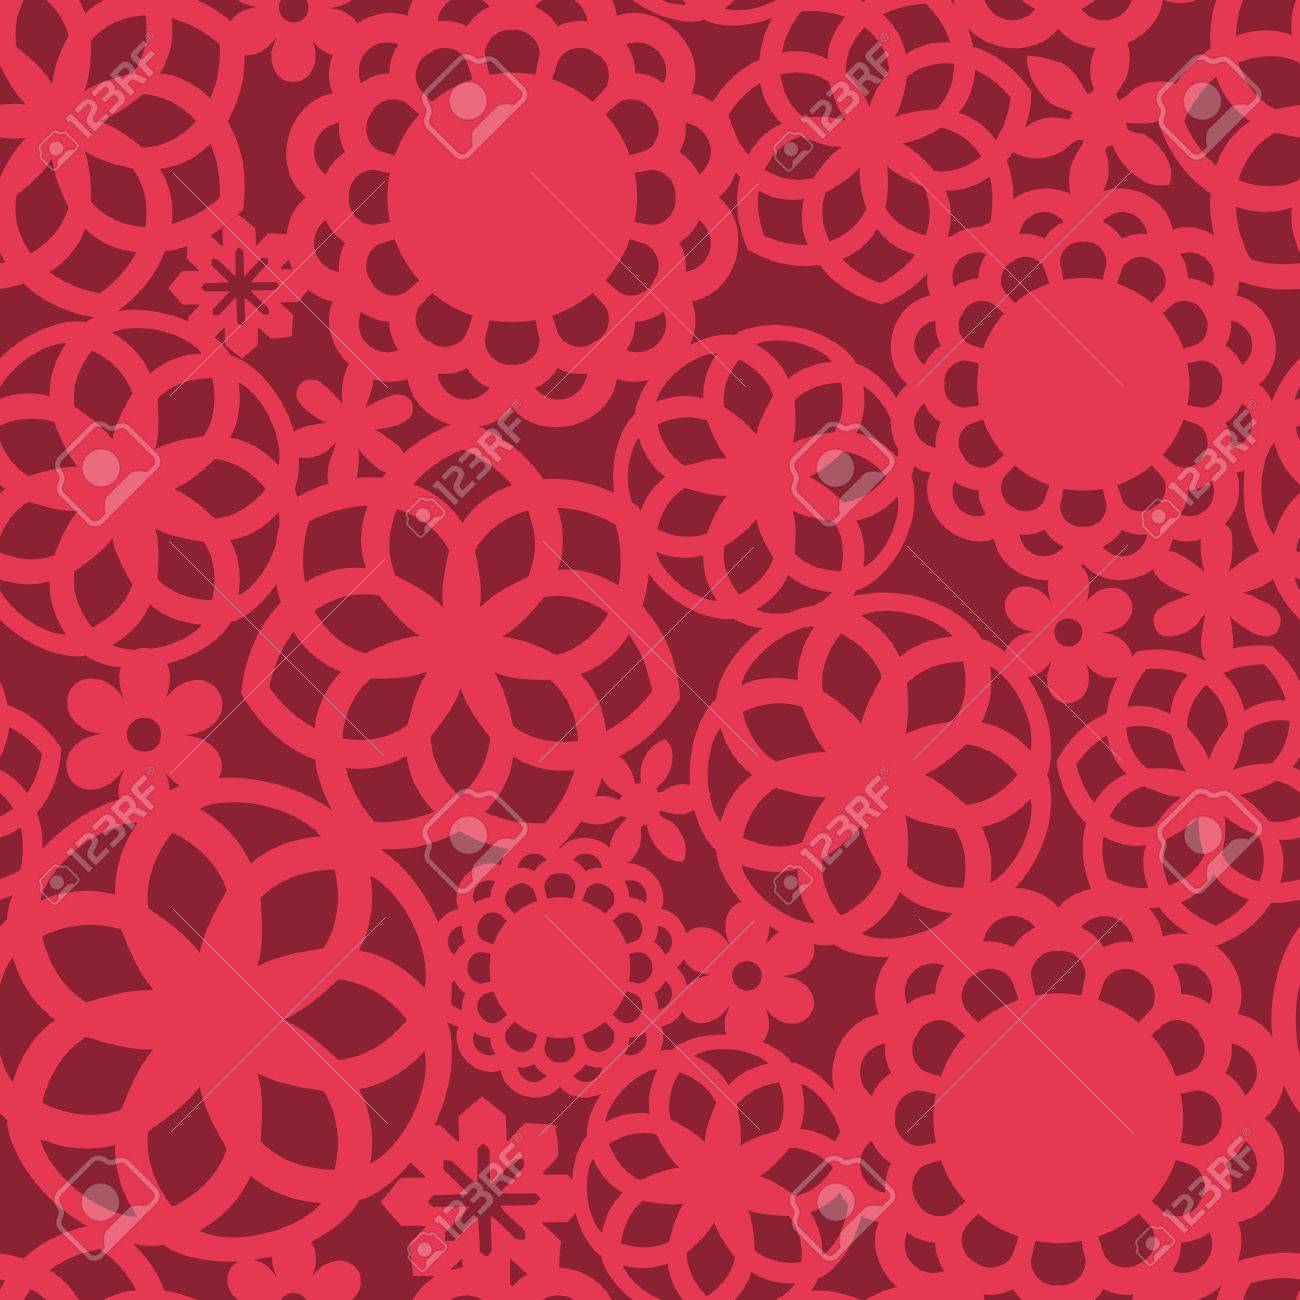 A Illustration Of Red Floral Fretwork Lace Seamless Pattern